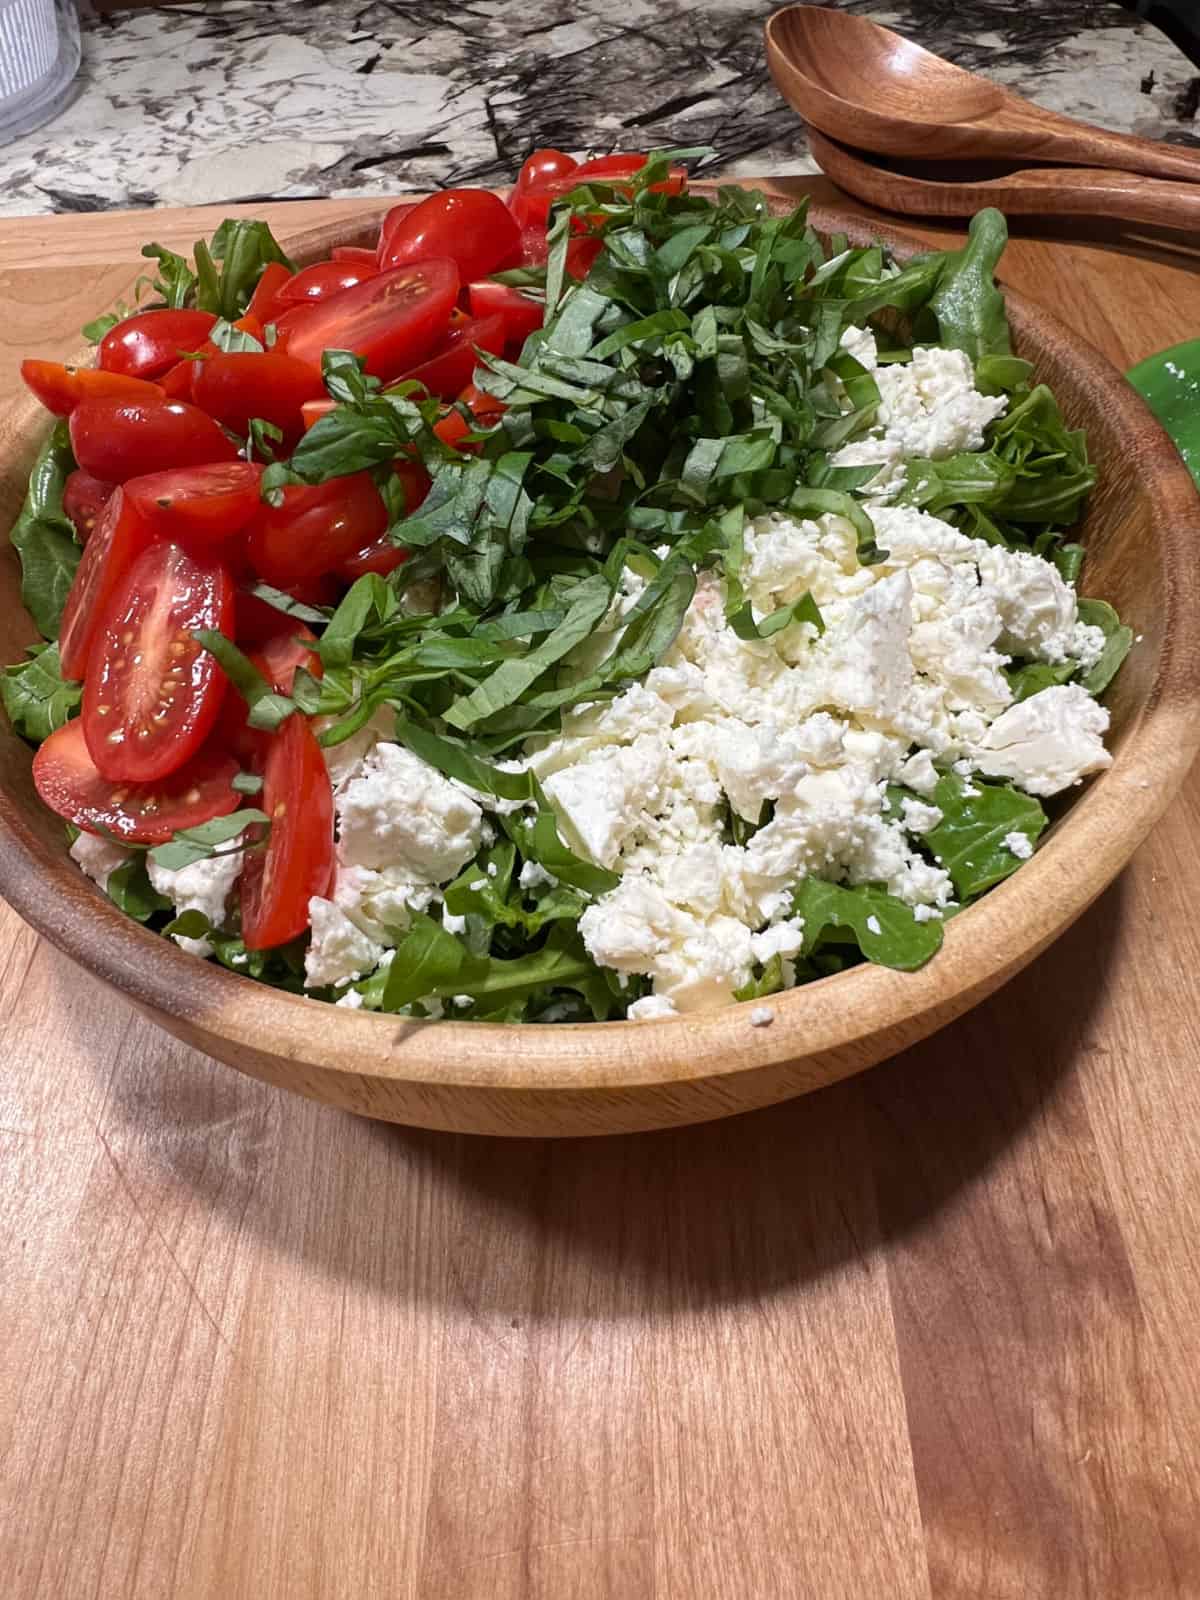 undressed salad ingredients in a wooden bowl.